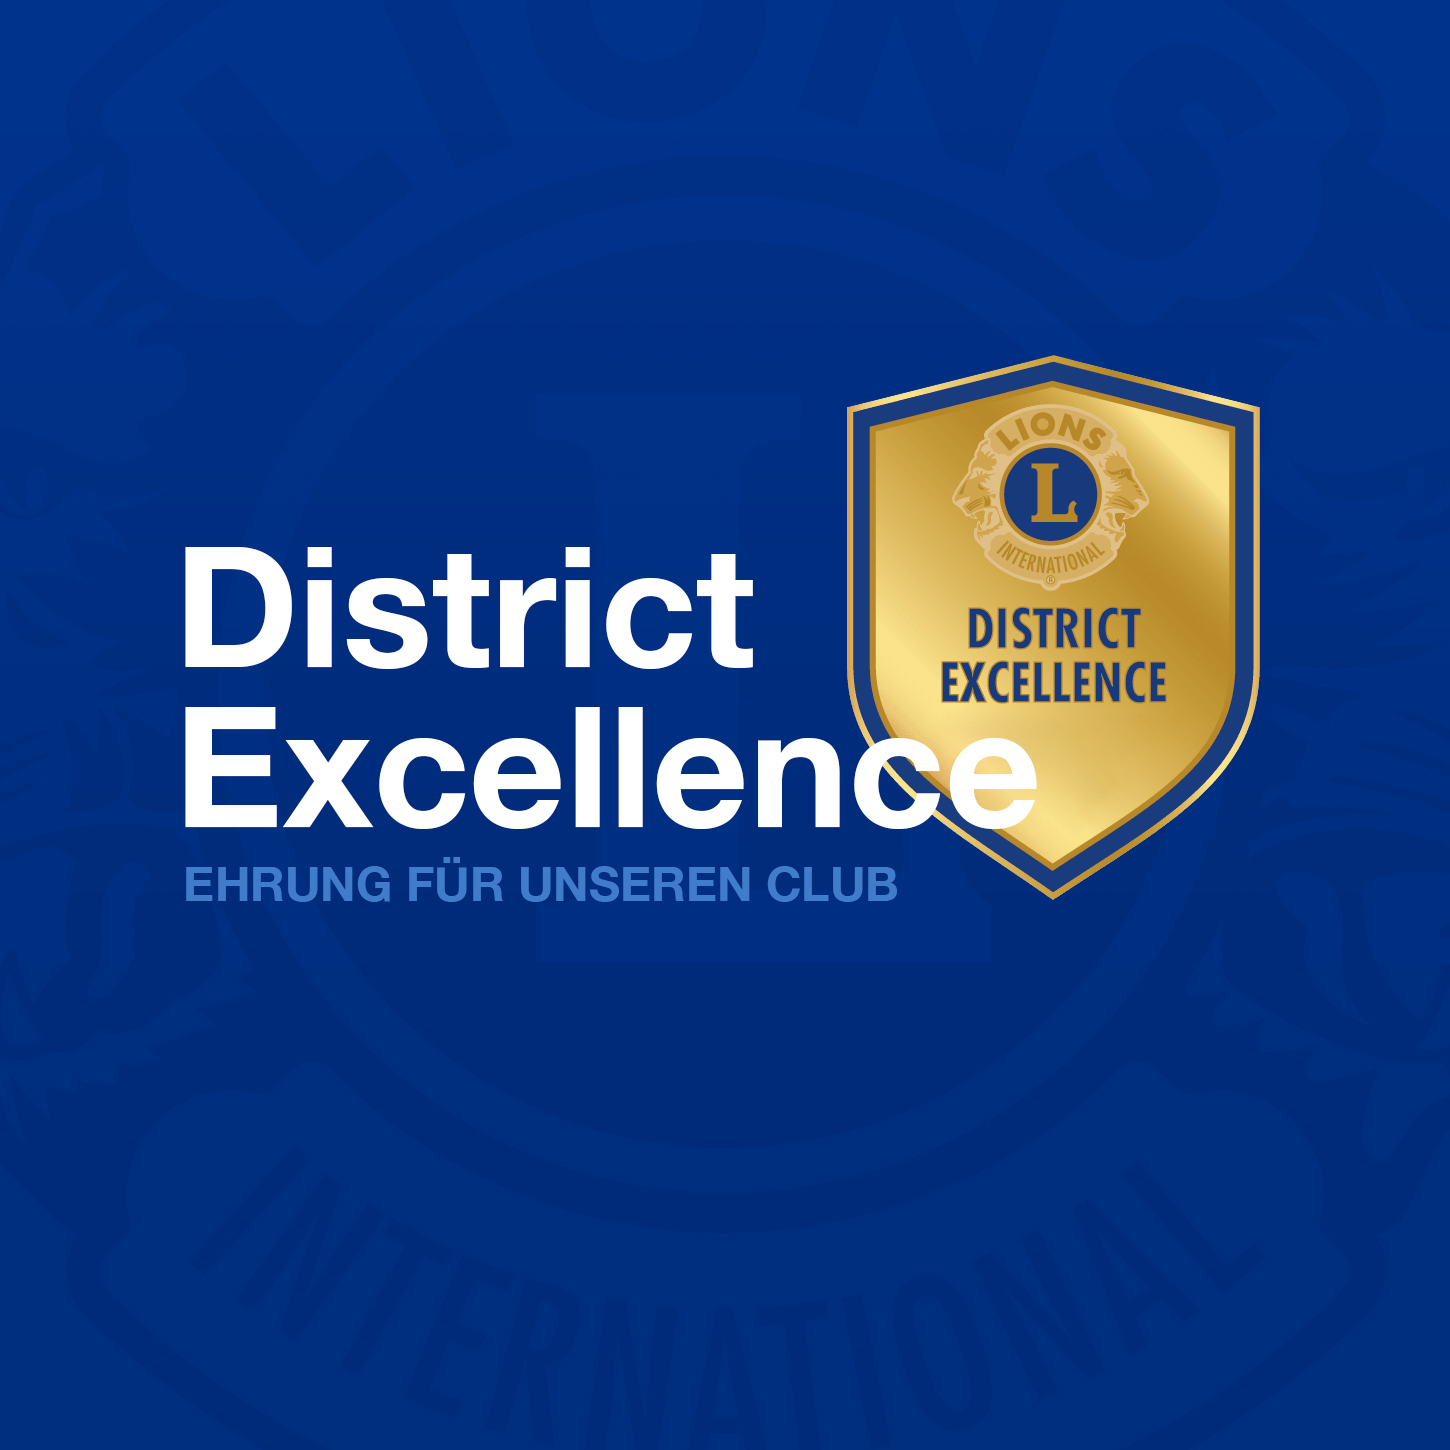 Lions Club Wittlich - District Excellence